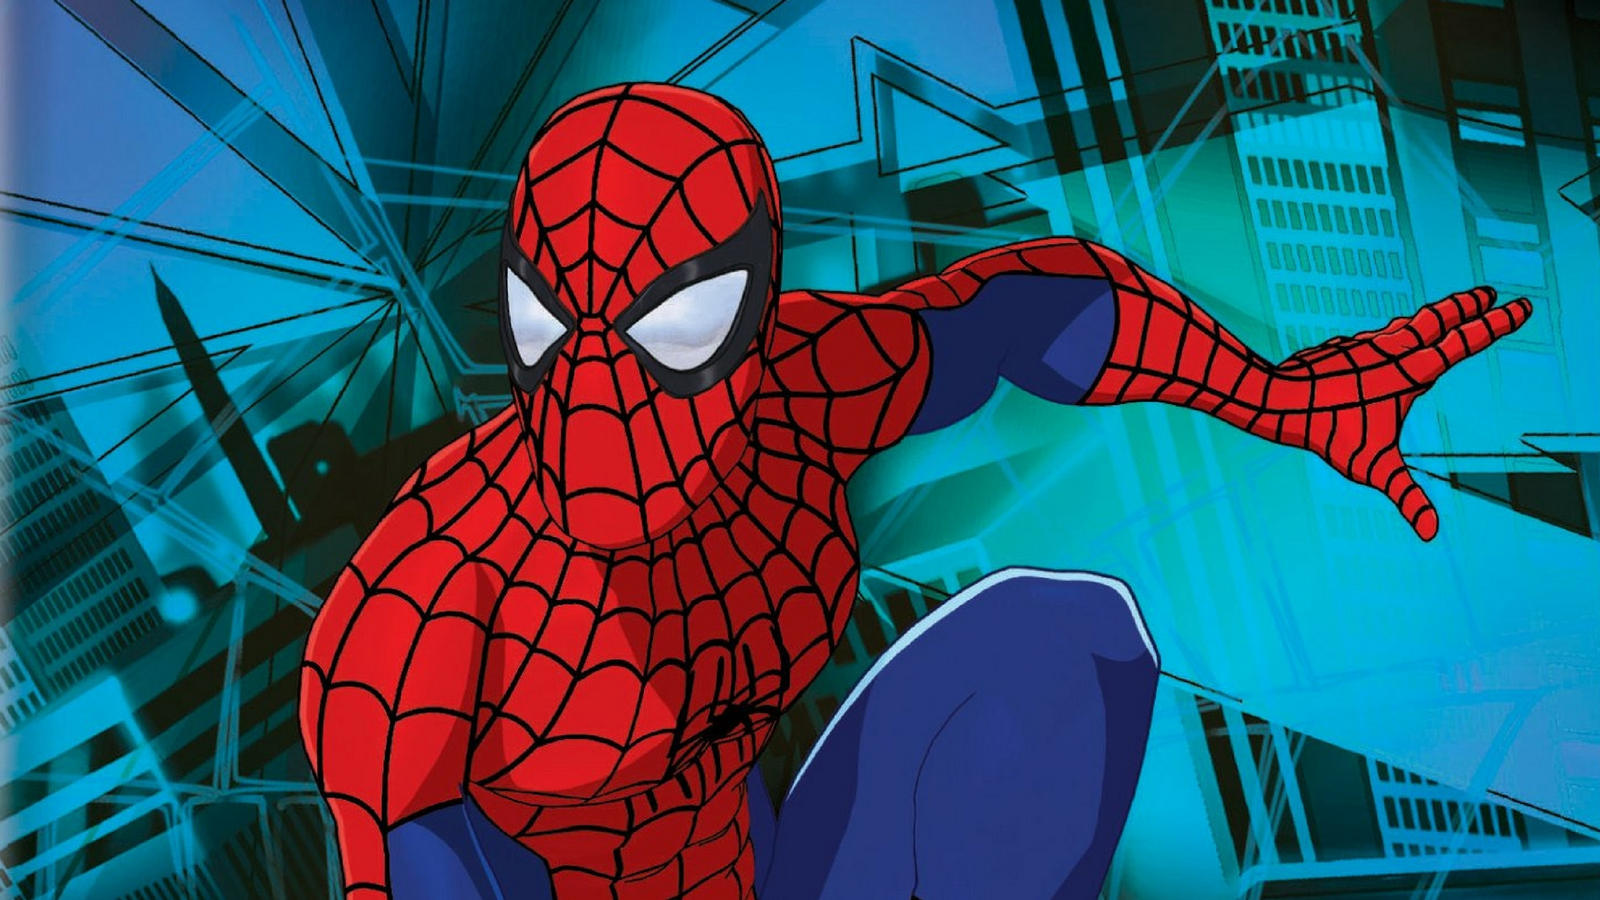 Spider-Man: The New Animated Series Wallpapers